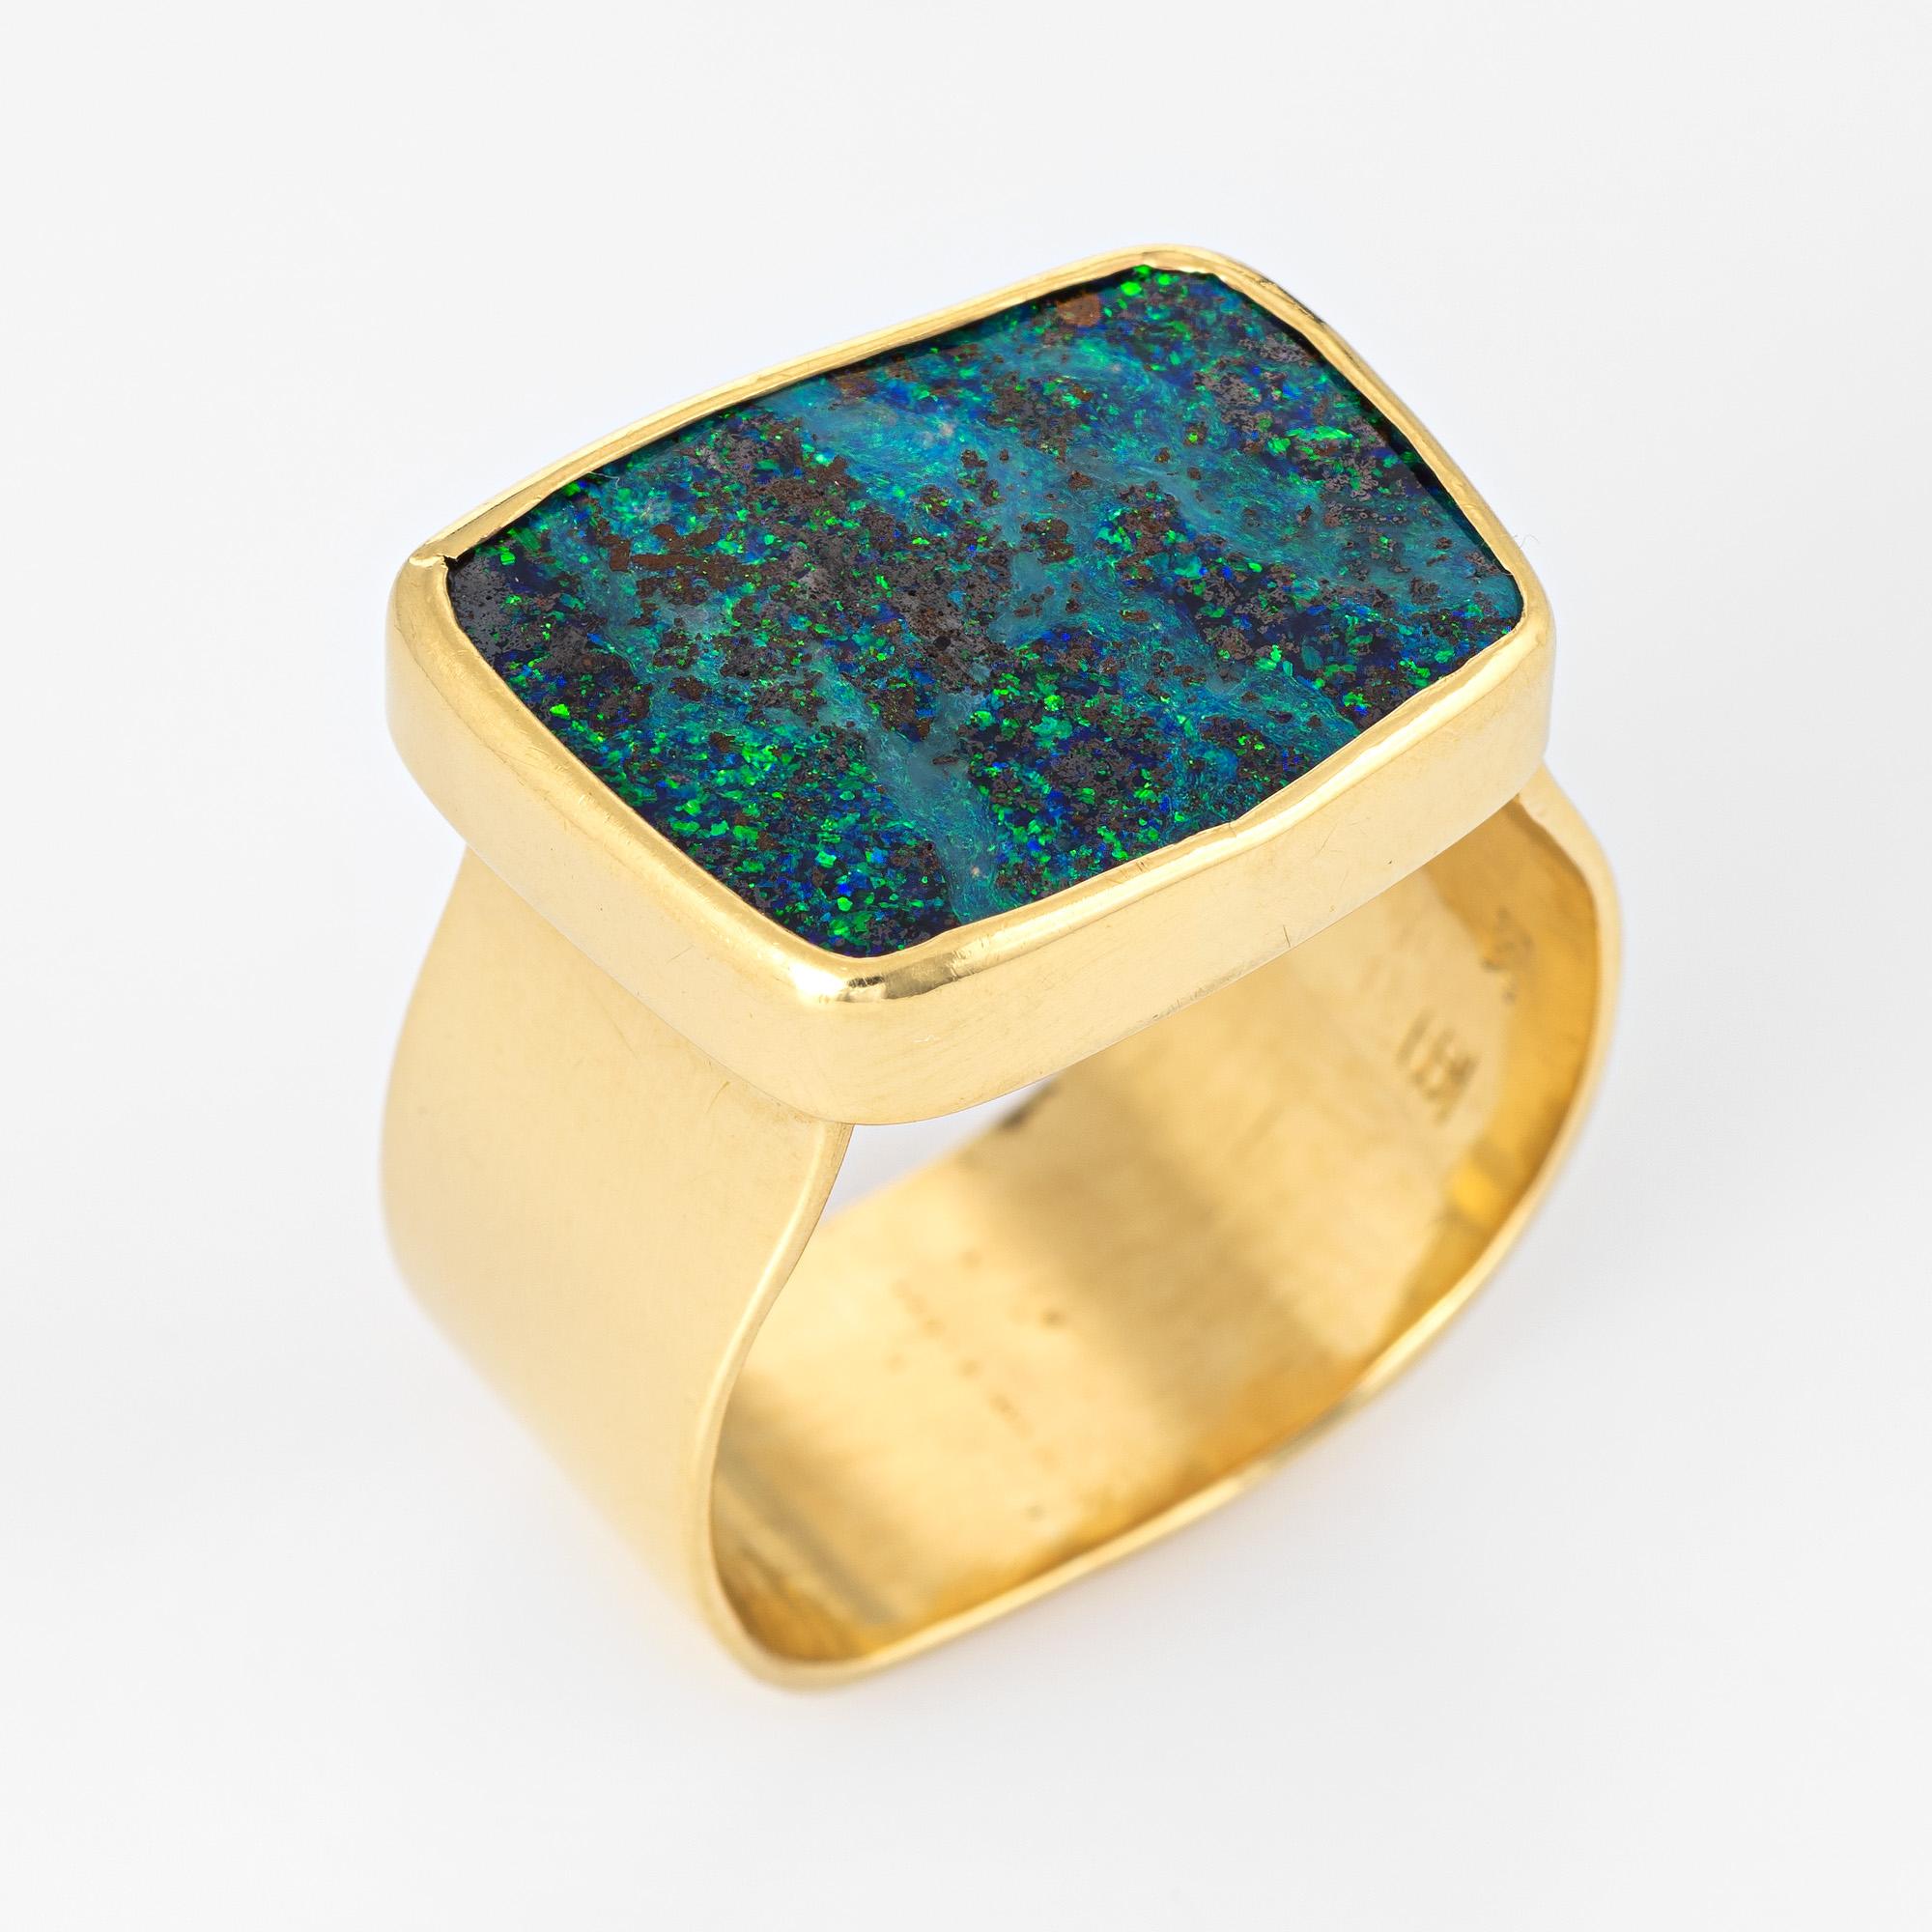 Stylish vintage boulder opal cocktail ring (circa 1980s to 1990s) crafted in 18 karat yellow gold. 

Boulder opal is inlaid flush into the mount measuring 17mm x 12.5mm. The opal is in excellent condition and free of cracks or chips. 

The opal